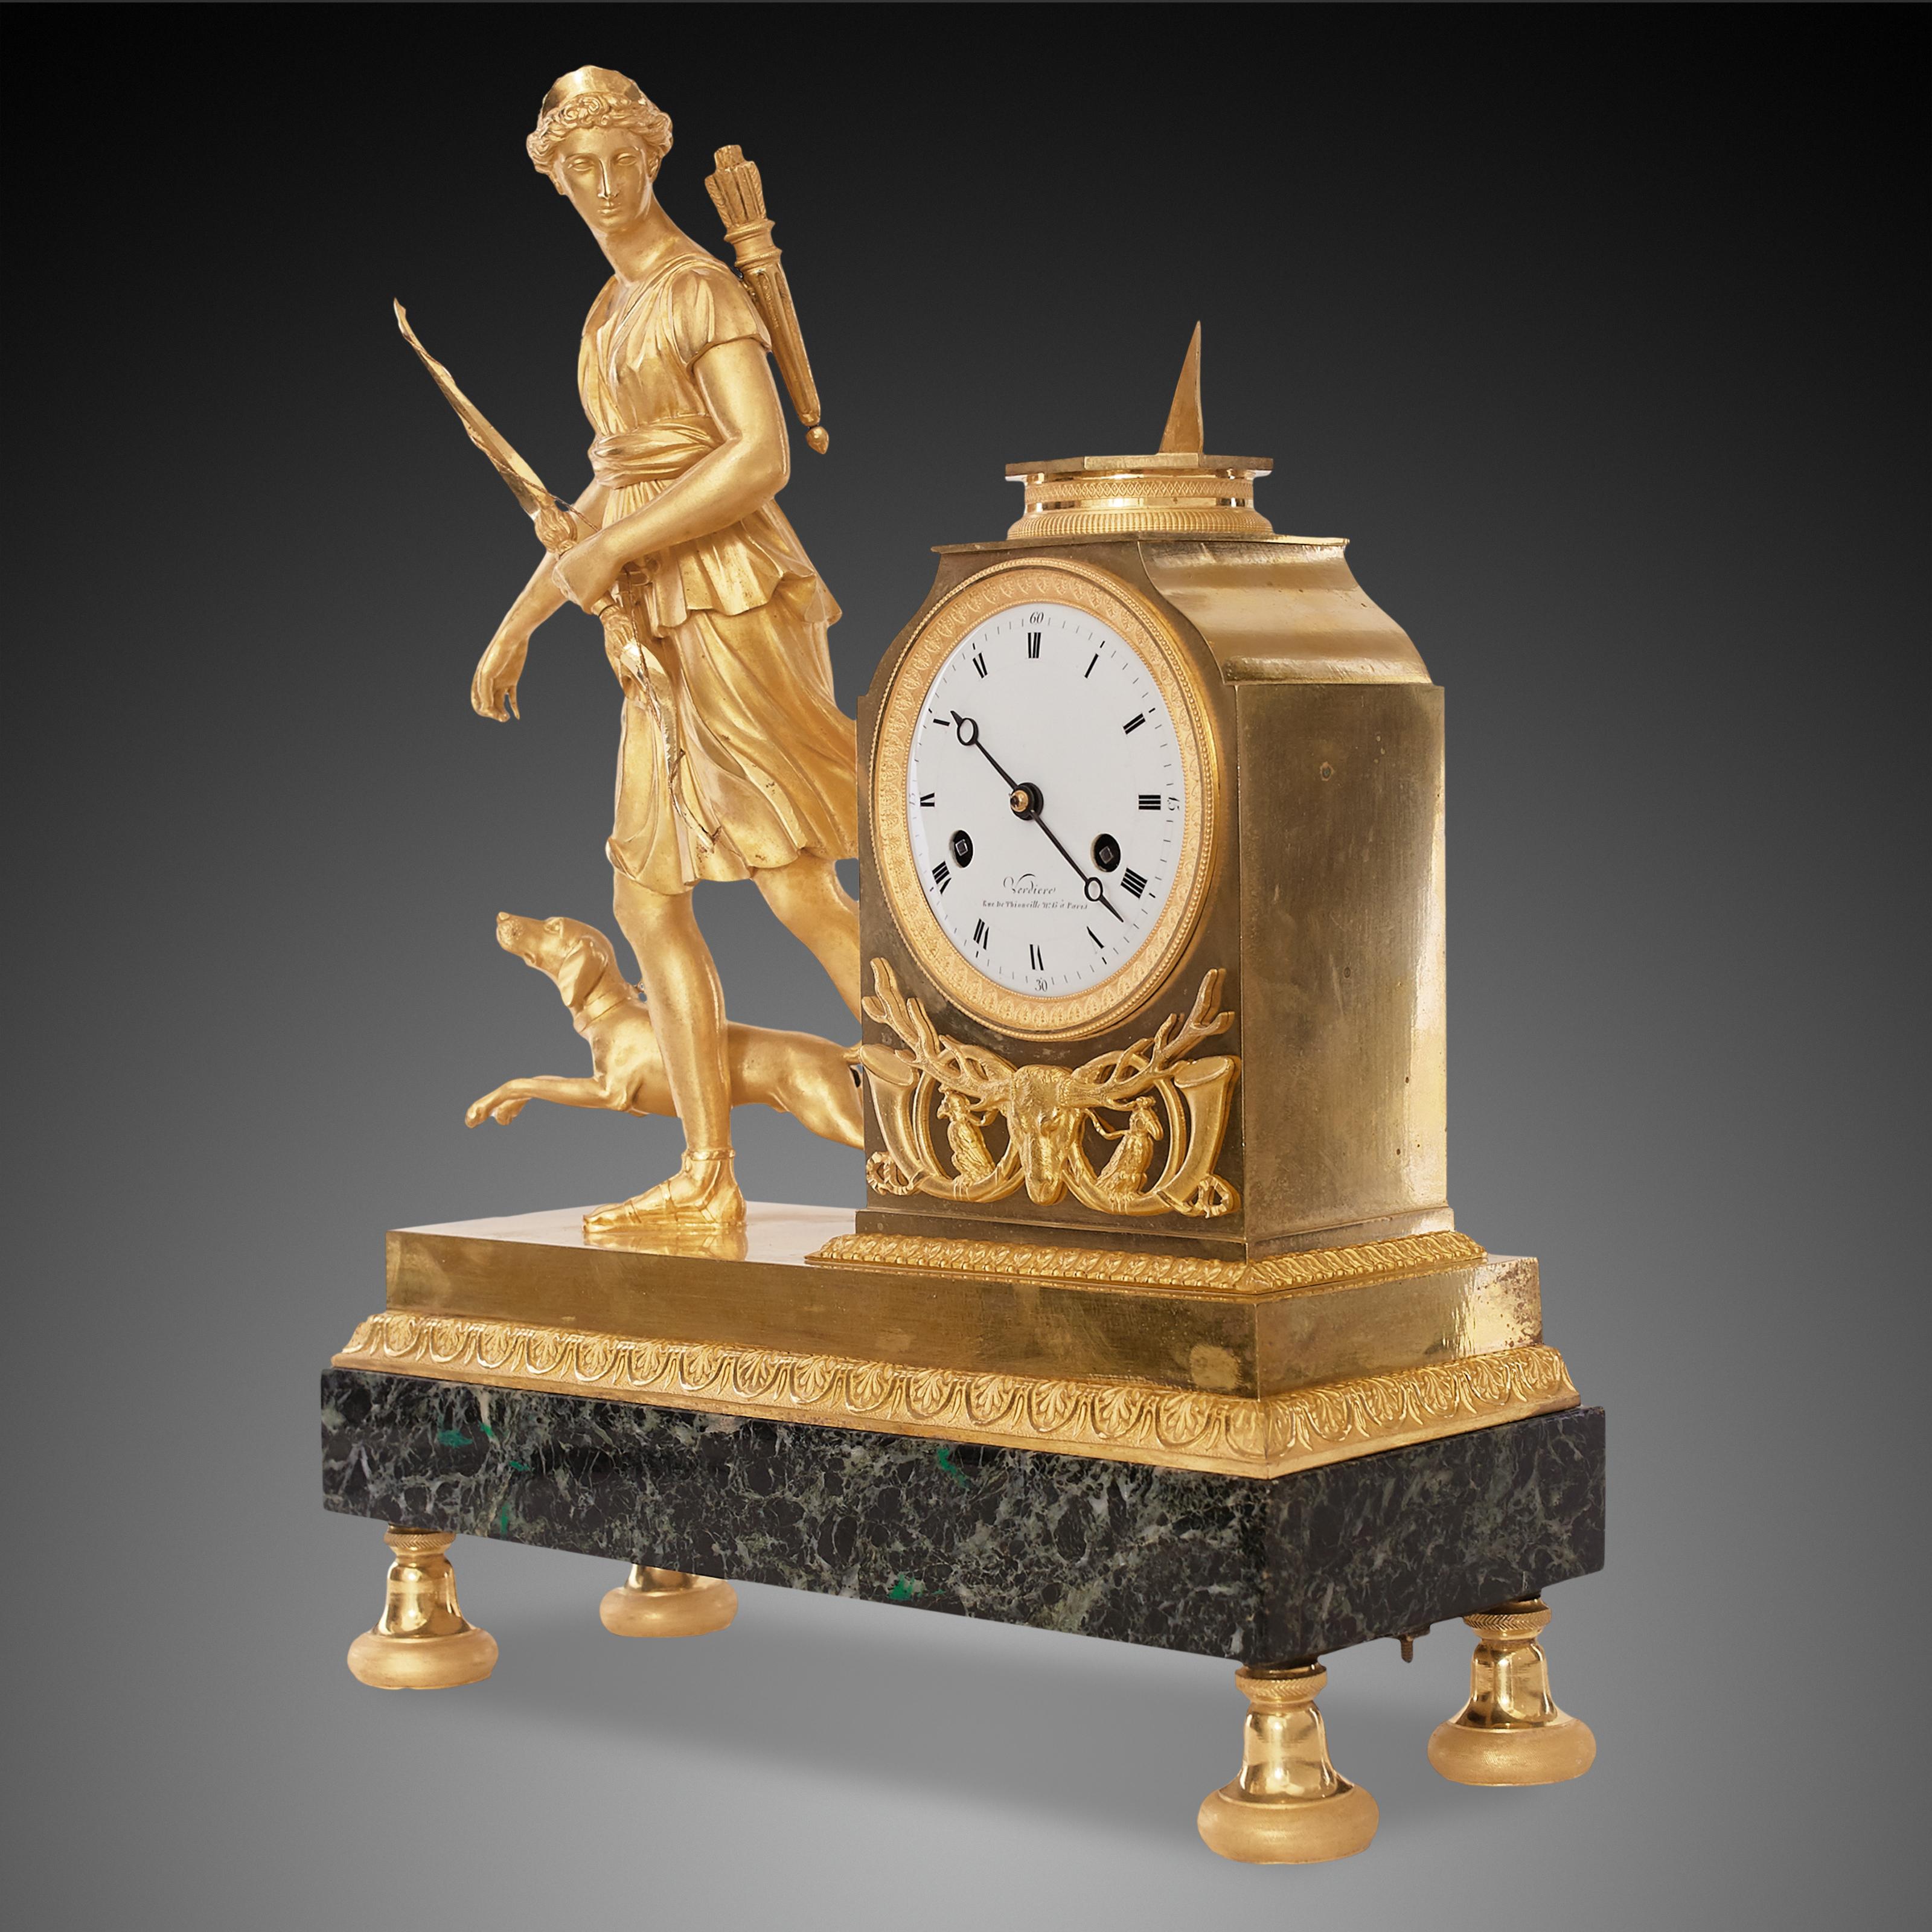 Profiled and finely chiselled disc feet with a tapered attachment. Rectangular green marble base with a palmette profile on top and a finely gilded, shiny base zone, with Diana walking with a dog on one side and the clockwork case on the other. This